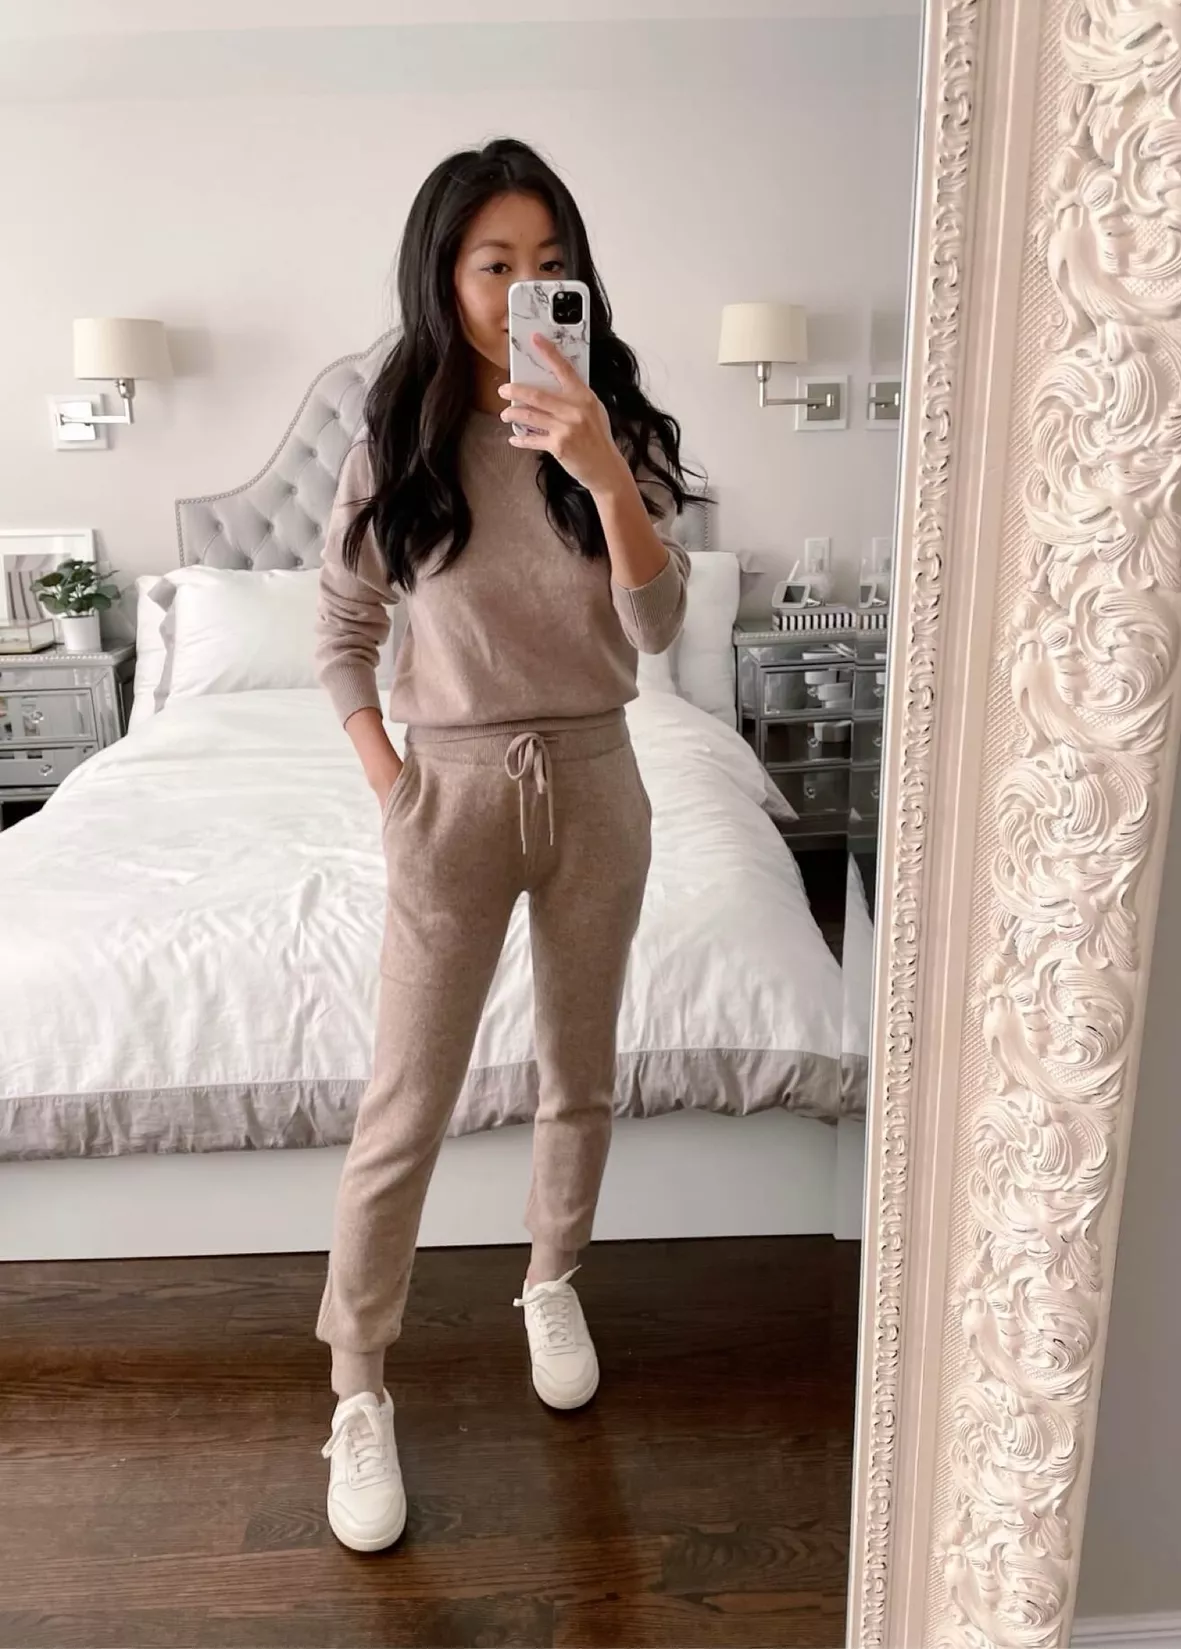 7 pairs of cashmere joggers that can elevate your cozy at-home style -  Yahoo Sports